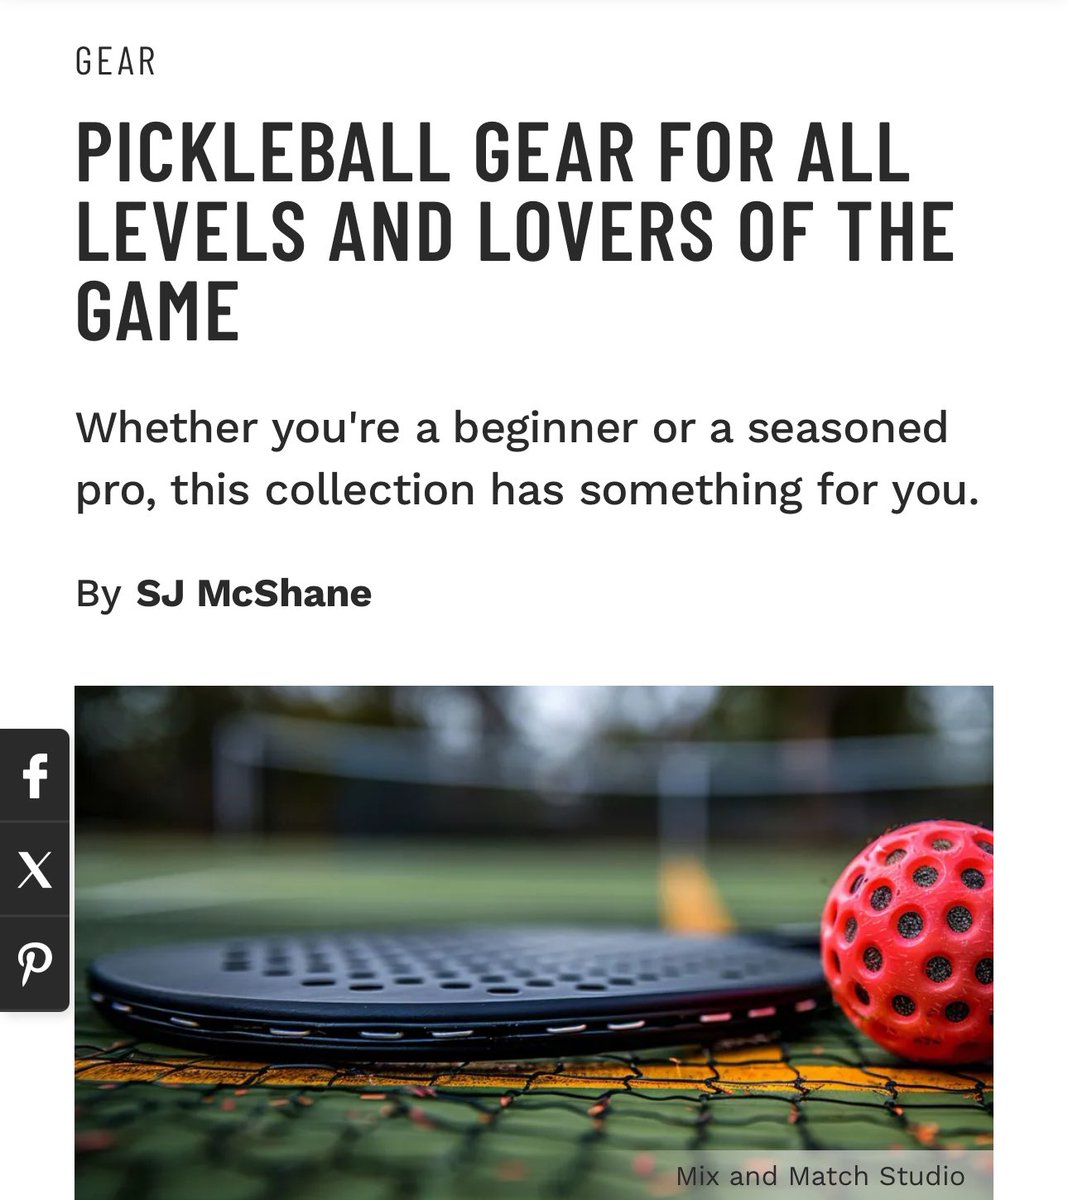 PICKLEBALL GEAR FOR ALL LEVELS AND LOVERS OF THE GAME Whether you're a beginner or a seasoned pro, this collection has something for you. By SJ McShane Read Article: muscleandfitness.com #fitnessgear #gear #productnews #products #sportsgear #traininggear